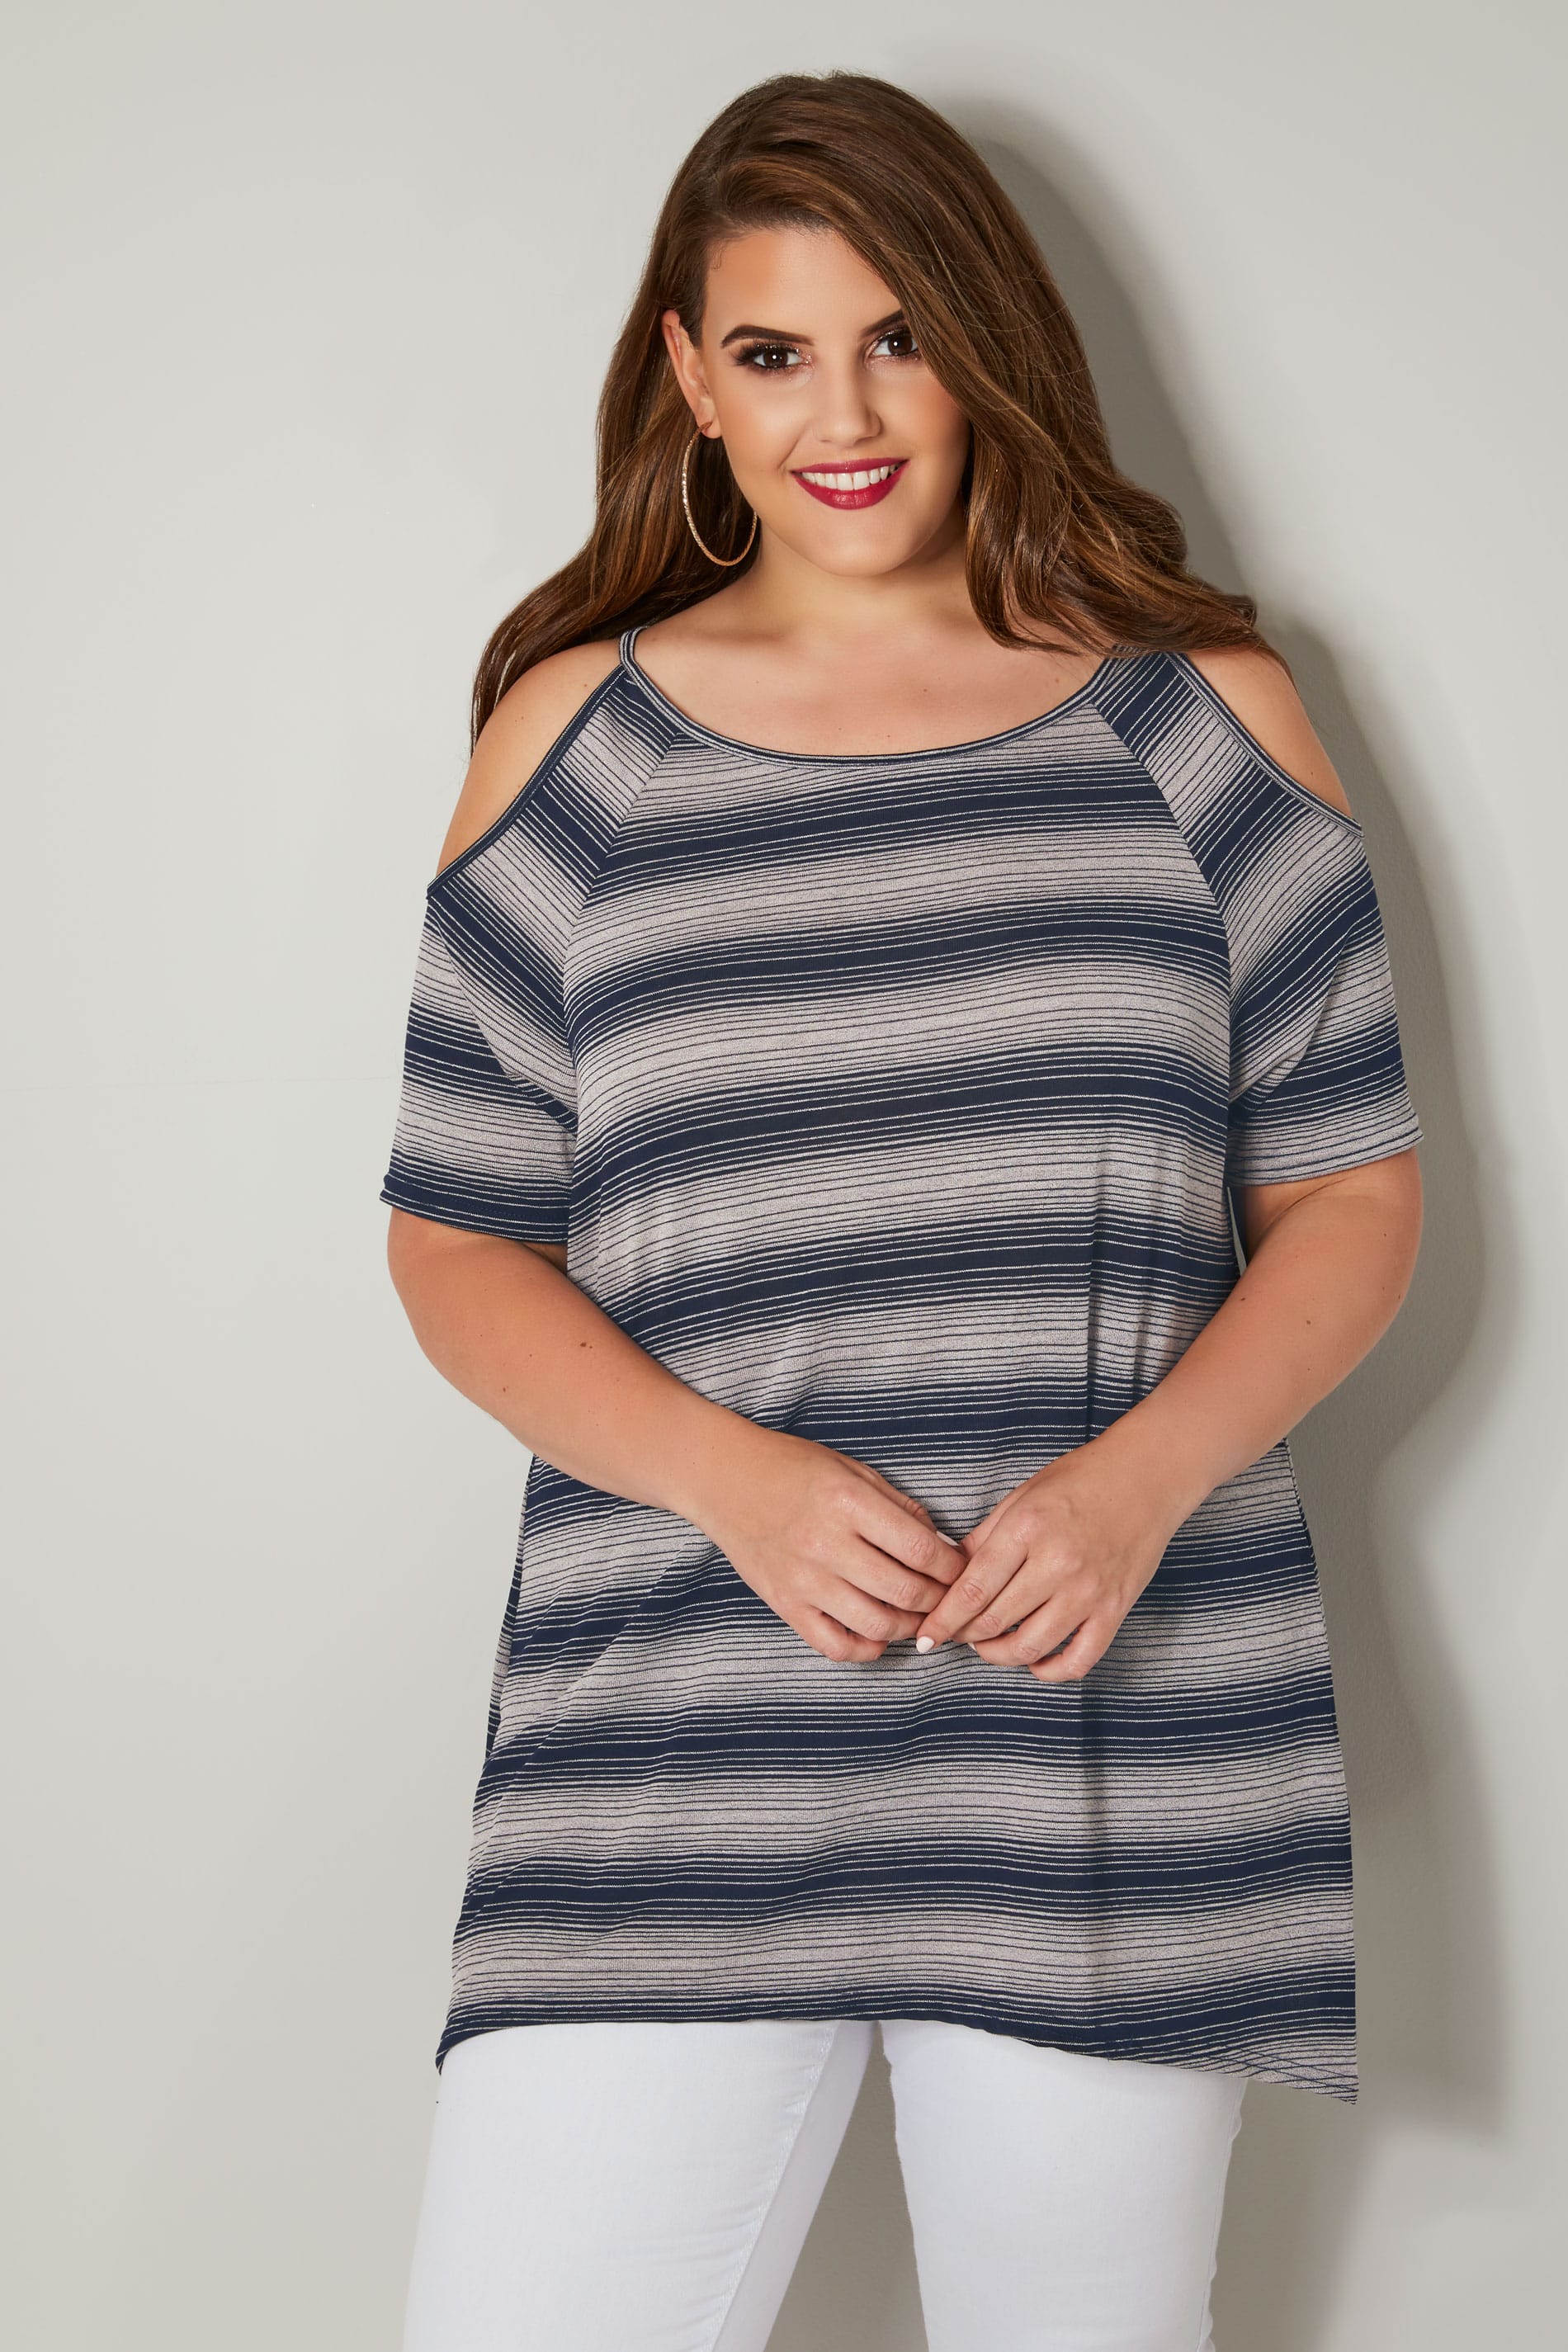 Navy Striped Cold Shoulder Top, plus size 16 to 32